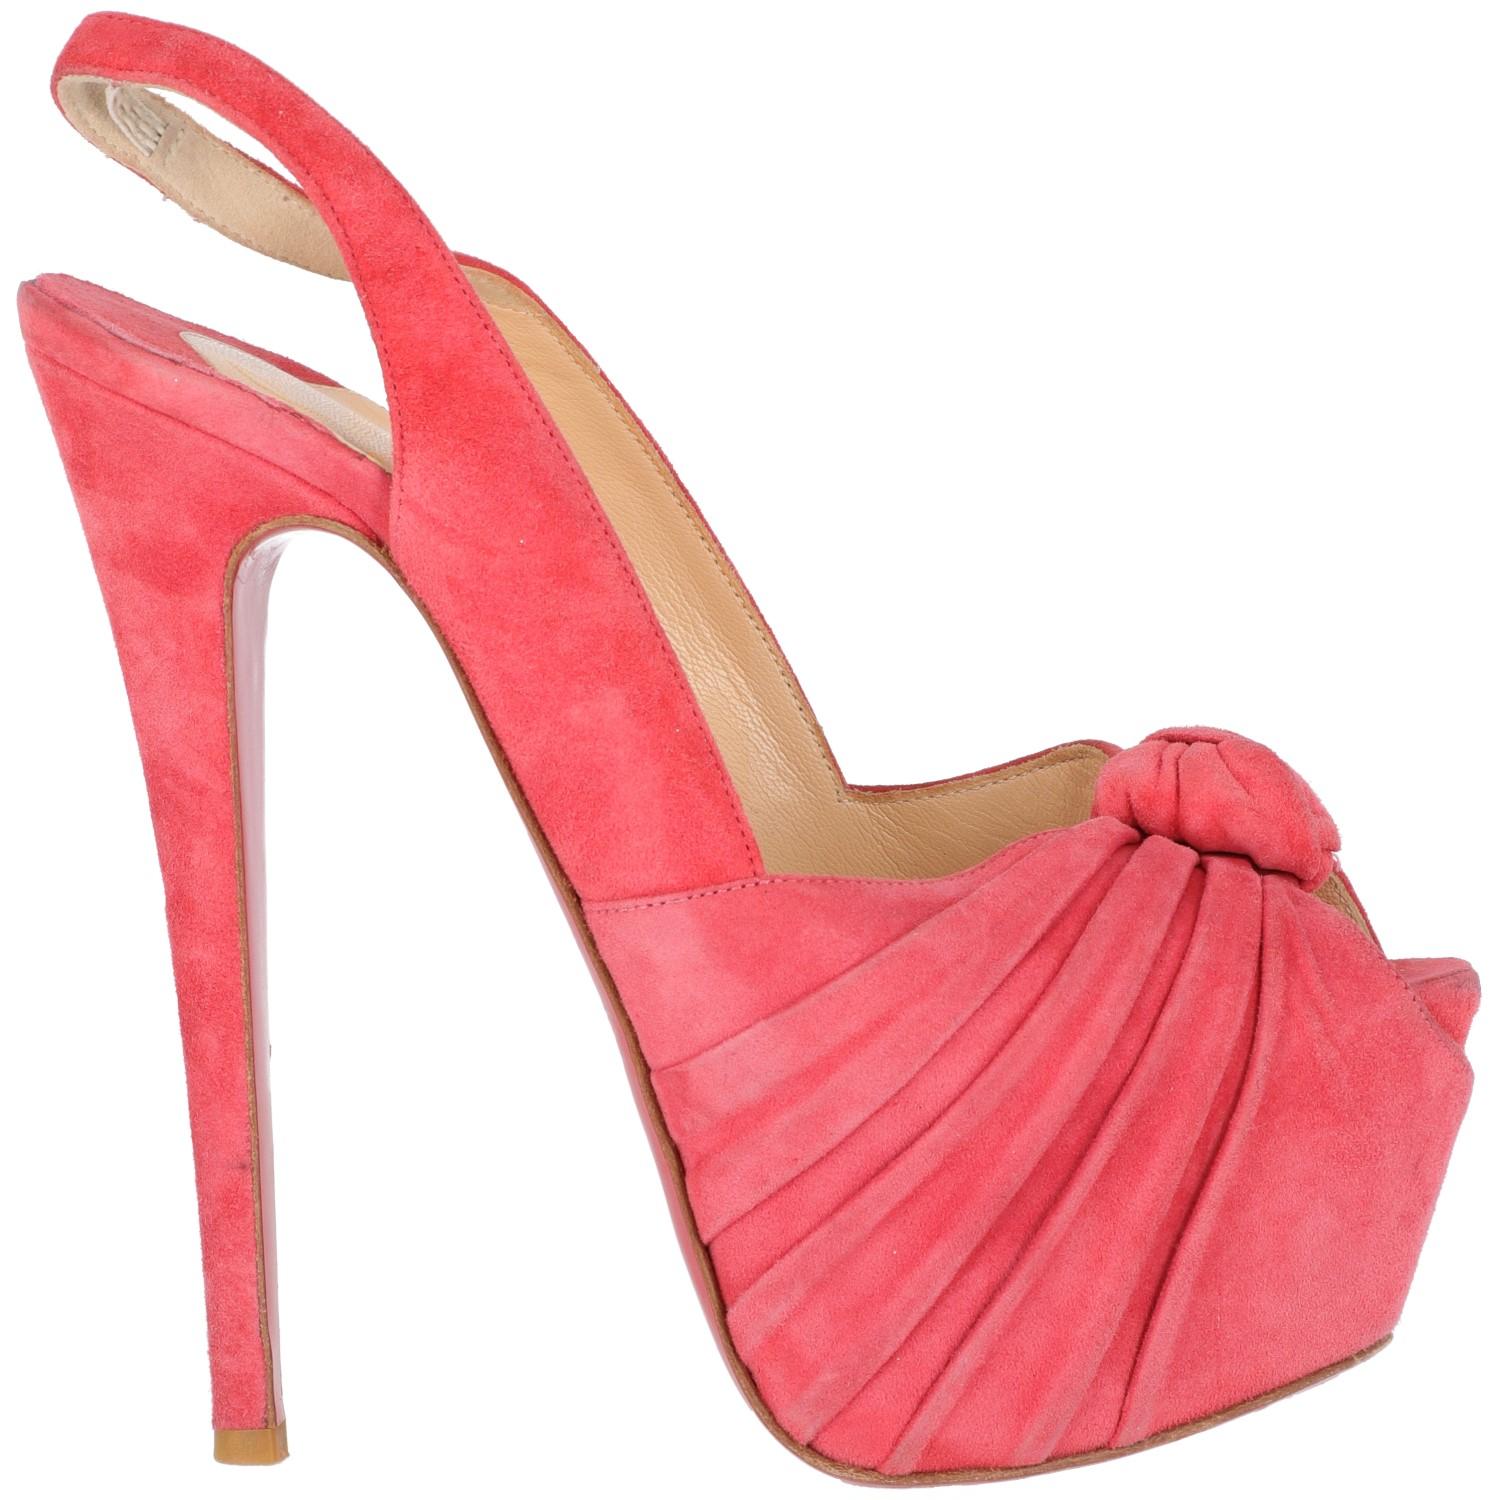 Christian Louboutin flamingo pink suede sandals with high heel and platform. Slingback model and open toe with decorative drapery.

The item shows some signs of wear on the leather as shown in the pictures.

Years: 2010s
Made in Italy

Size: 38 ½ EU